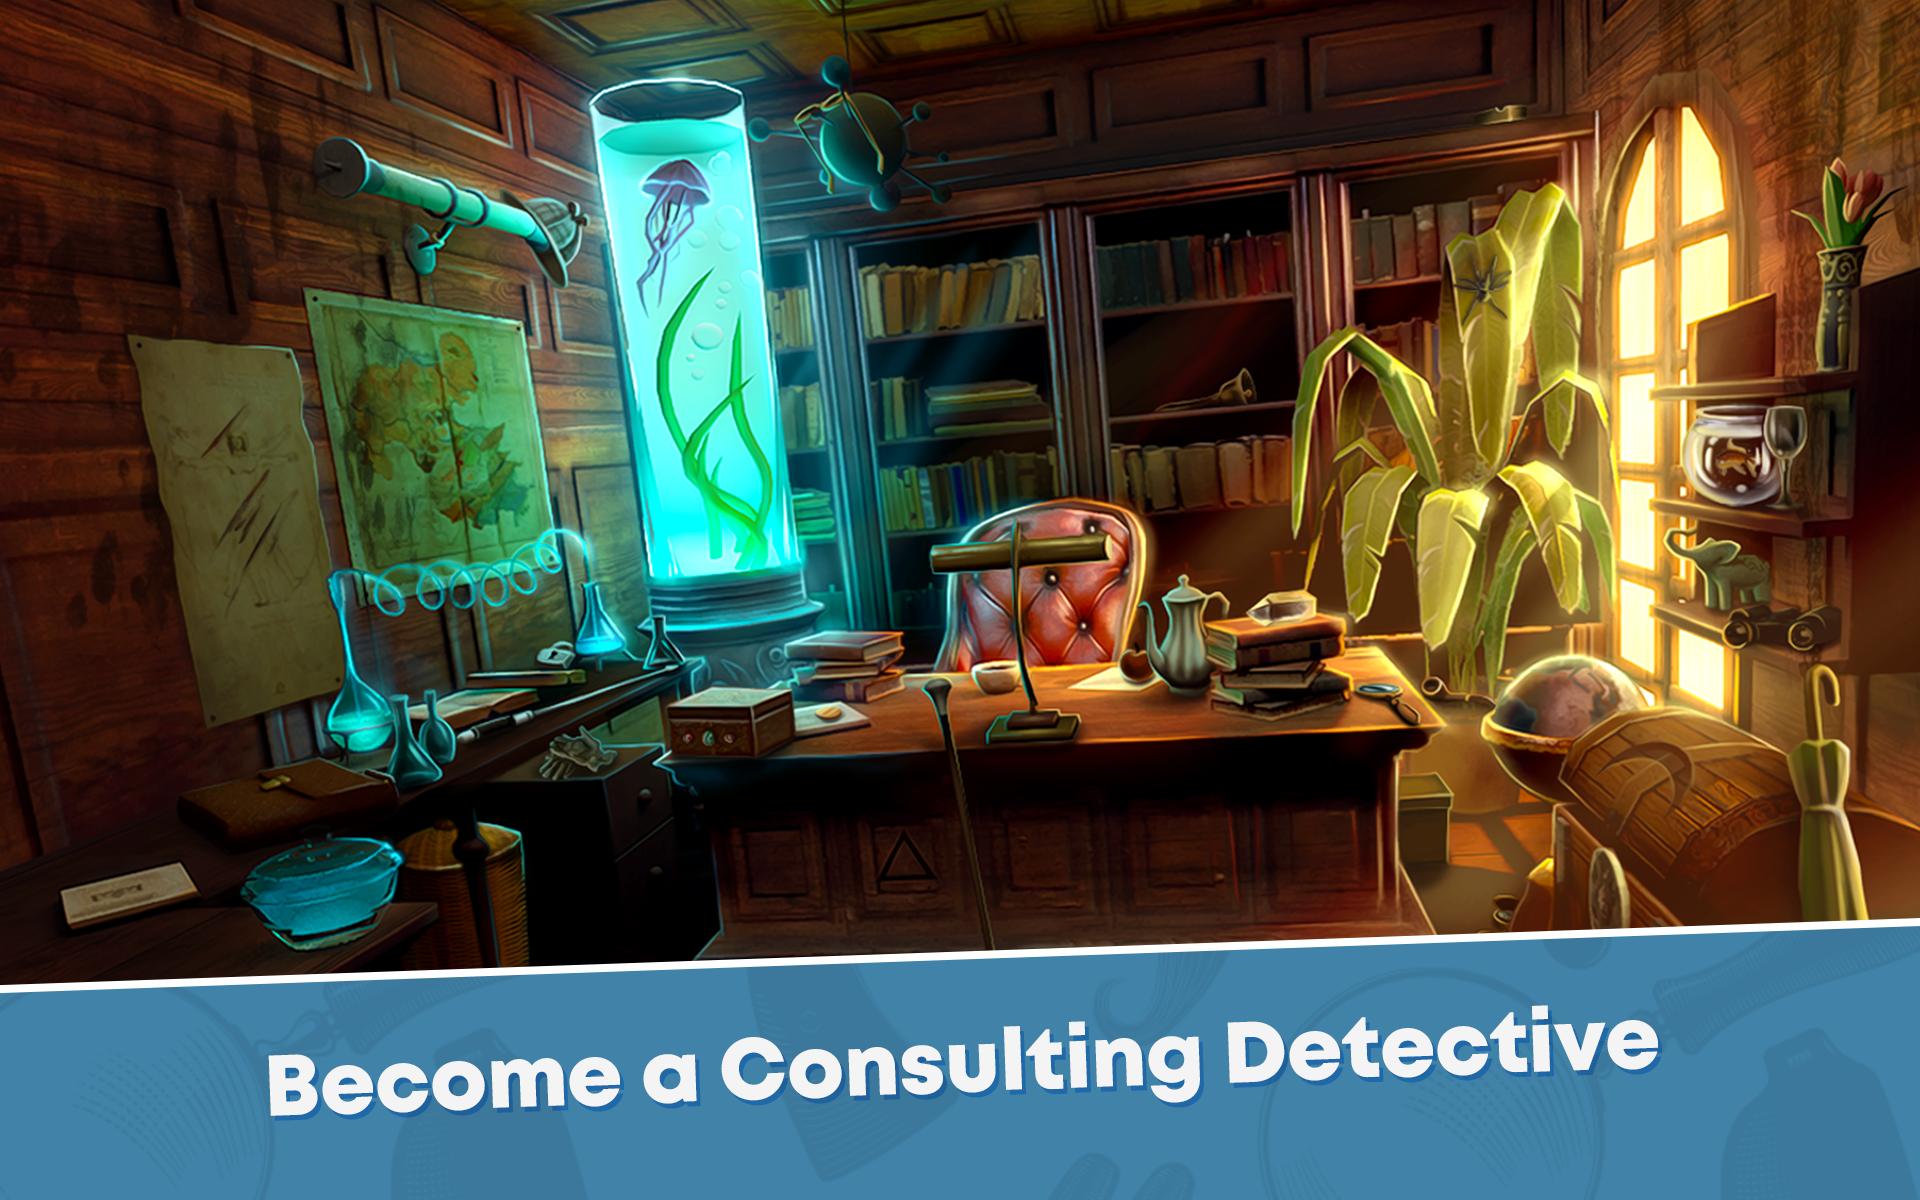 Sherlock Holmes & Watson Hidden Objects Game for Android - APK Download